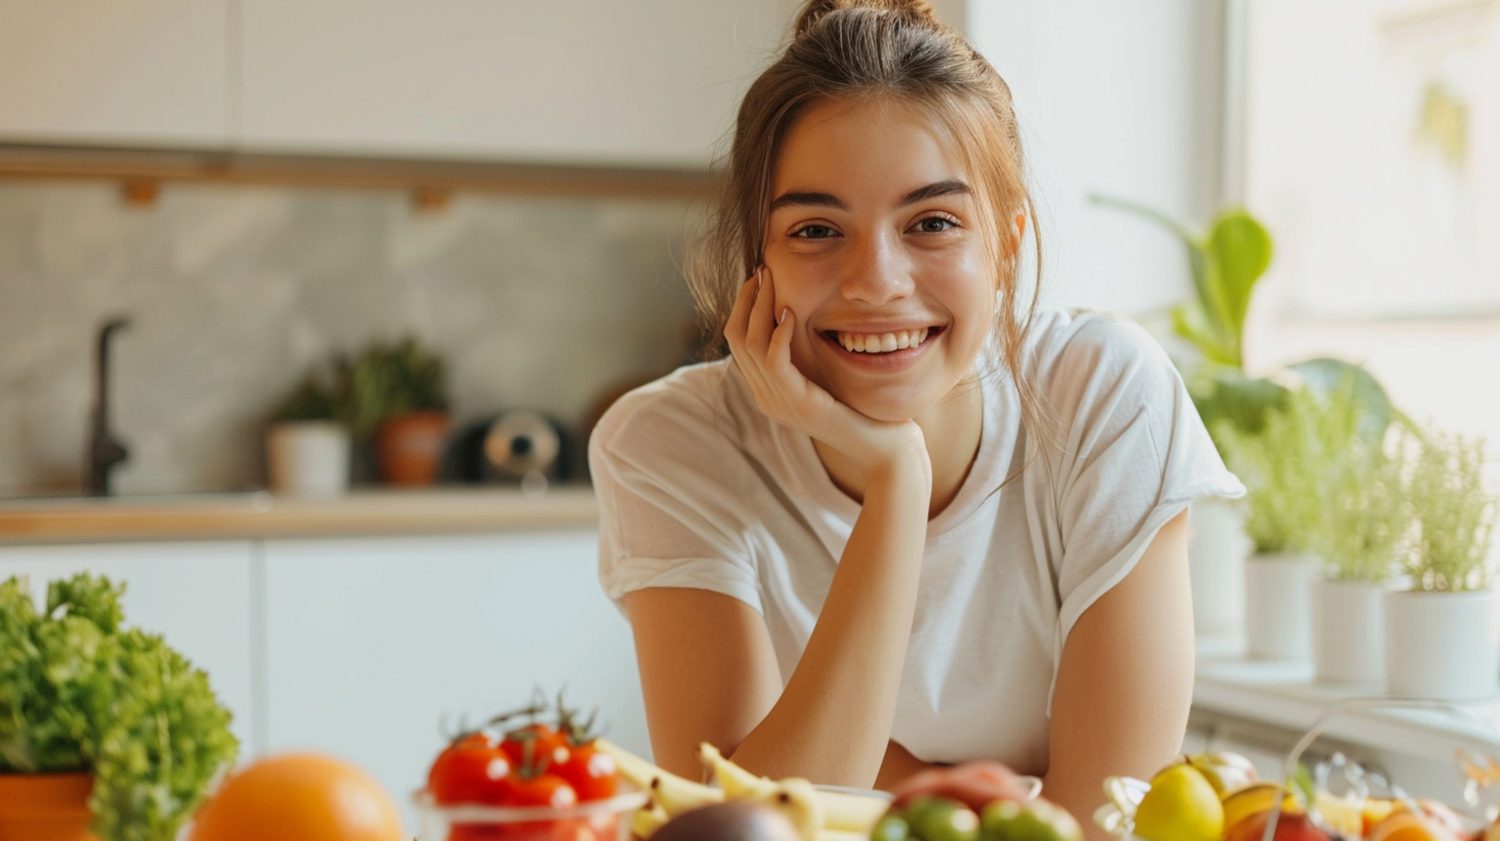 What to Eat (and Avoid) for Healthy, Glowing Skin, According to a Dermatologist